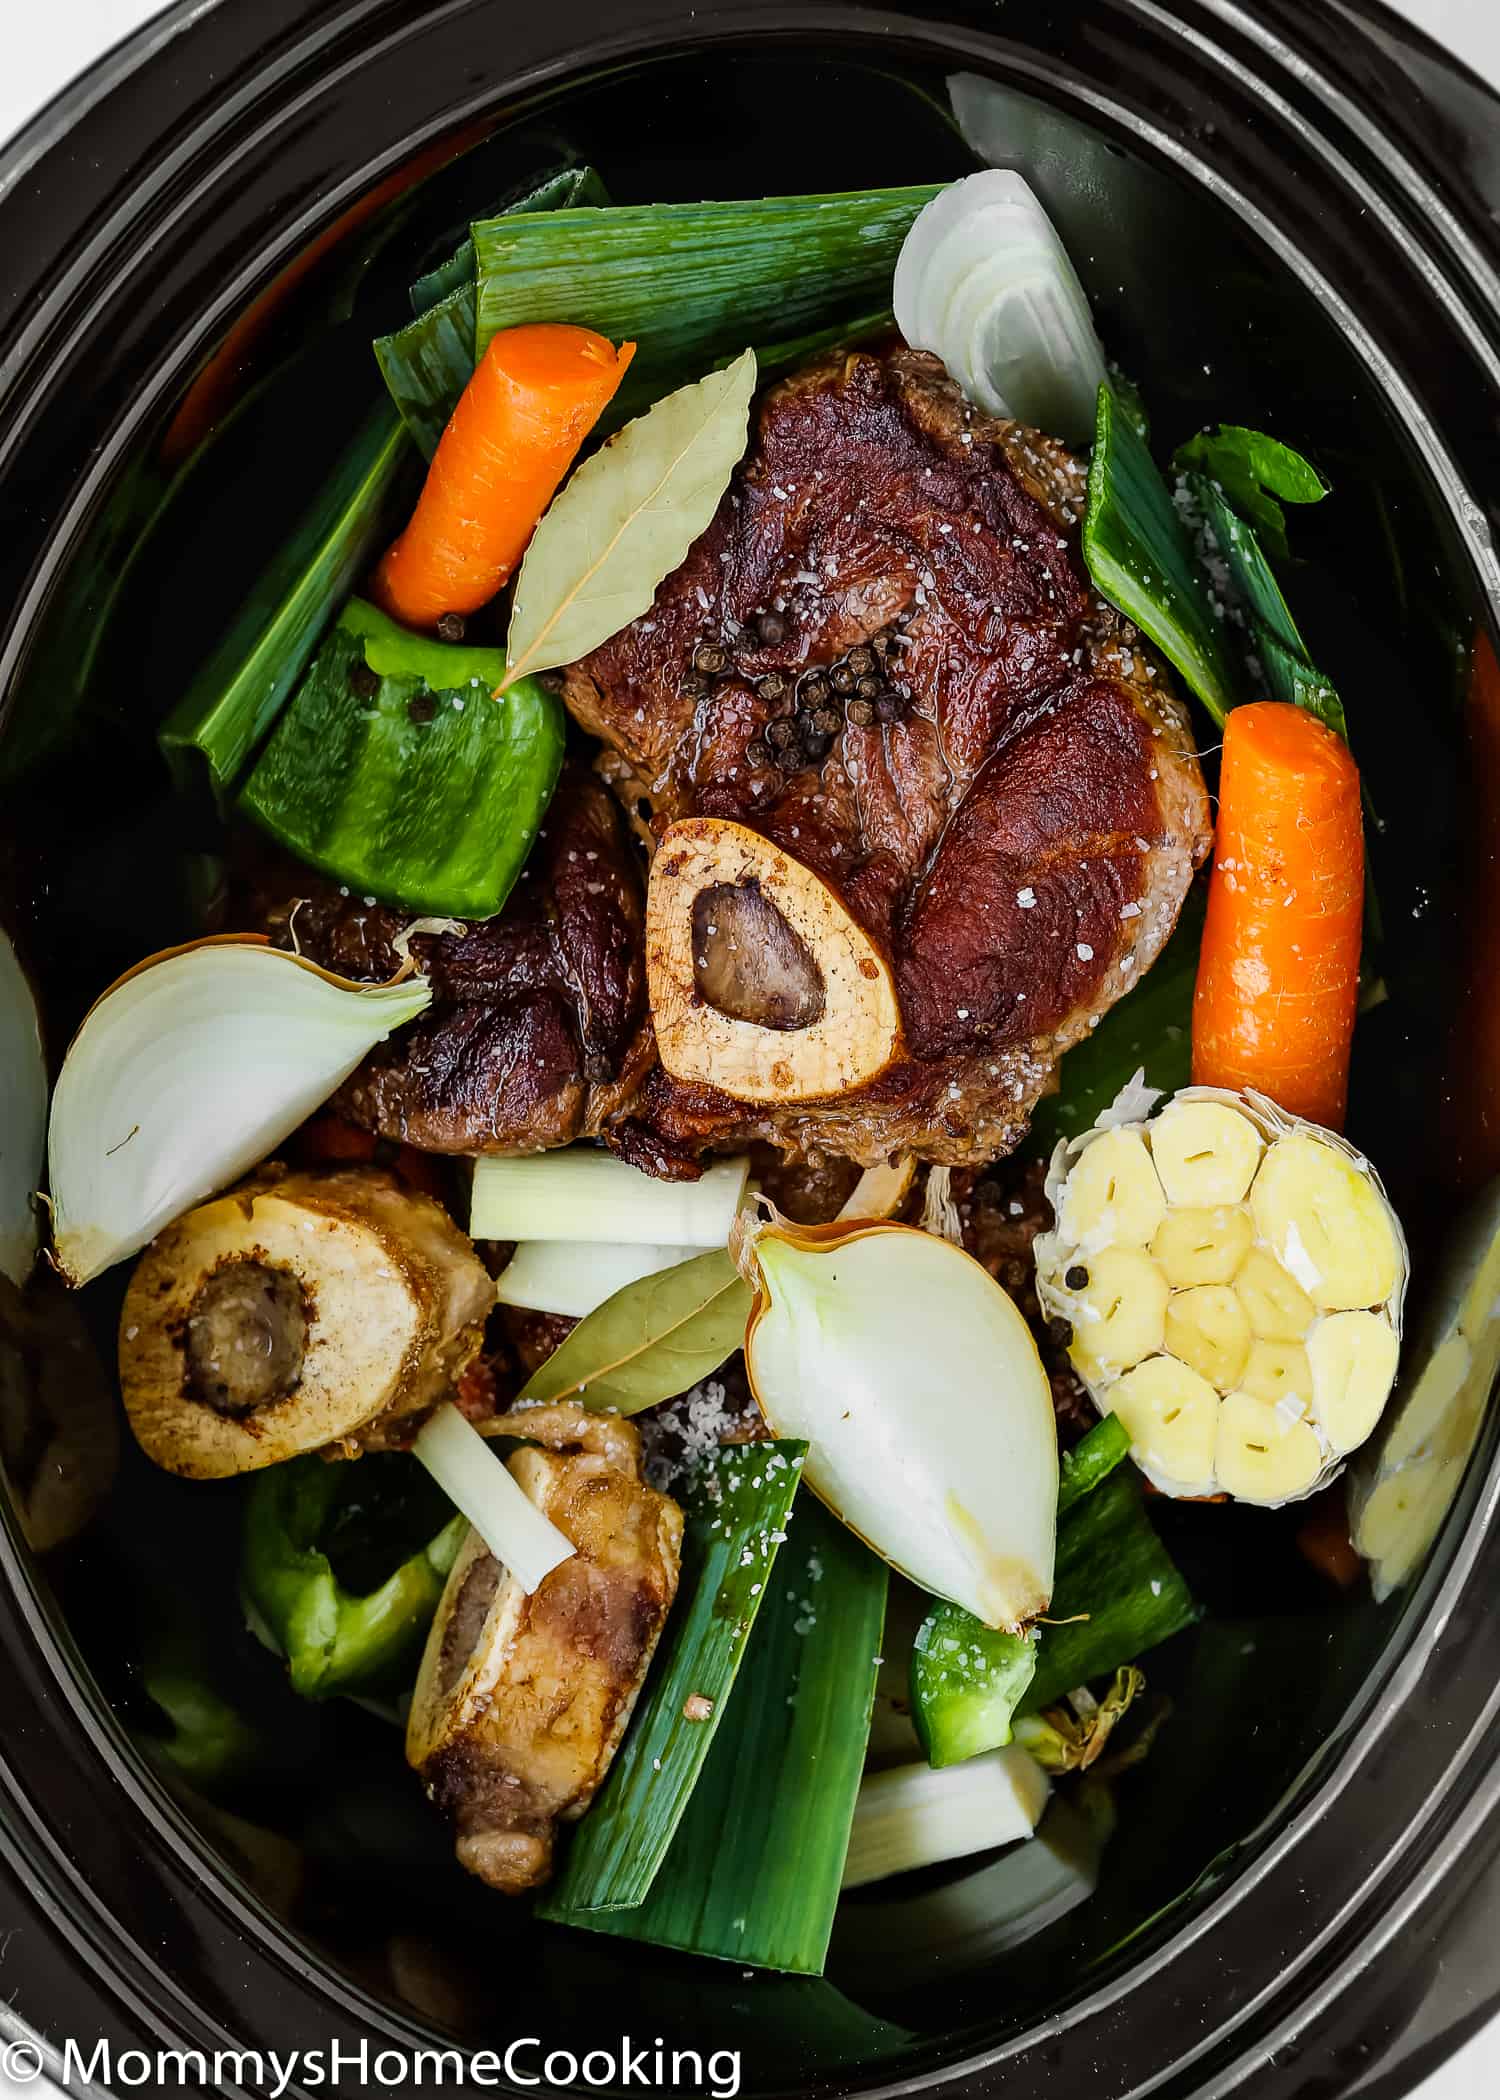 This Slow Cooker Beef Bone Broth is rich in nutrients and super tasty! It's easy to make and it's a money saver, too.Â Enjoy it on its own or use it to make your favorite stew, soup, and many other dishes. https://mommyshomecooking.com